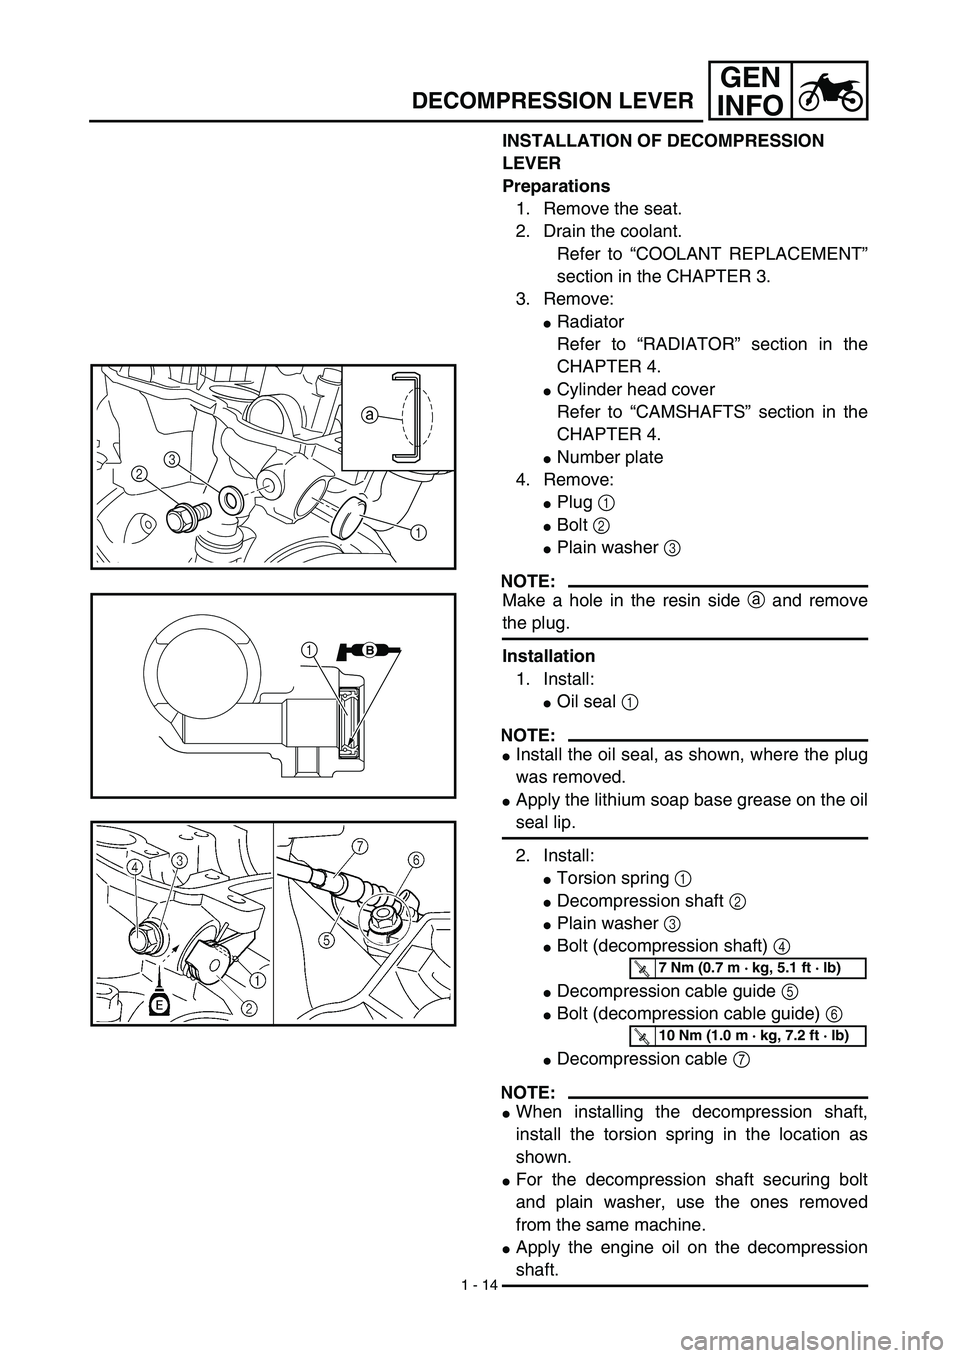 YAMAHA YZ450F 2003  Owners Manual 1 - 14
GEN
INFO
DECOMPRESSION LEVER
INSTALLATION OF DECOMPRESSION 
LEVER
Preparations
1. Remove the seat.
2. Drain the coolant.
Refer to “COOLANT REPLACEMENT”
section in the CHAPTER 3.
3. Remove:
